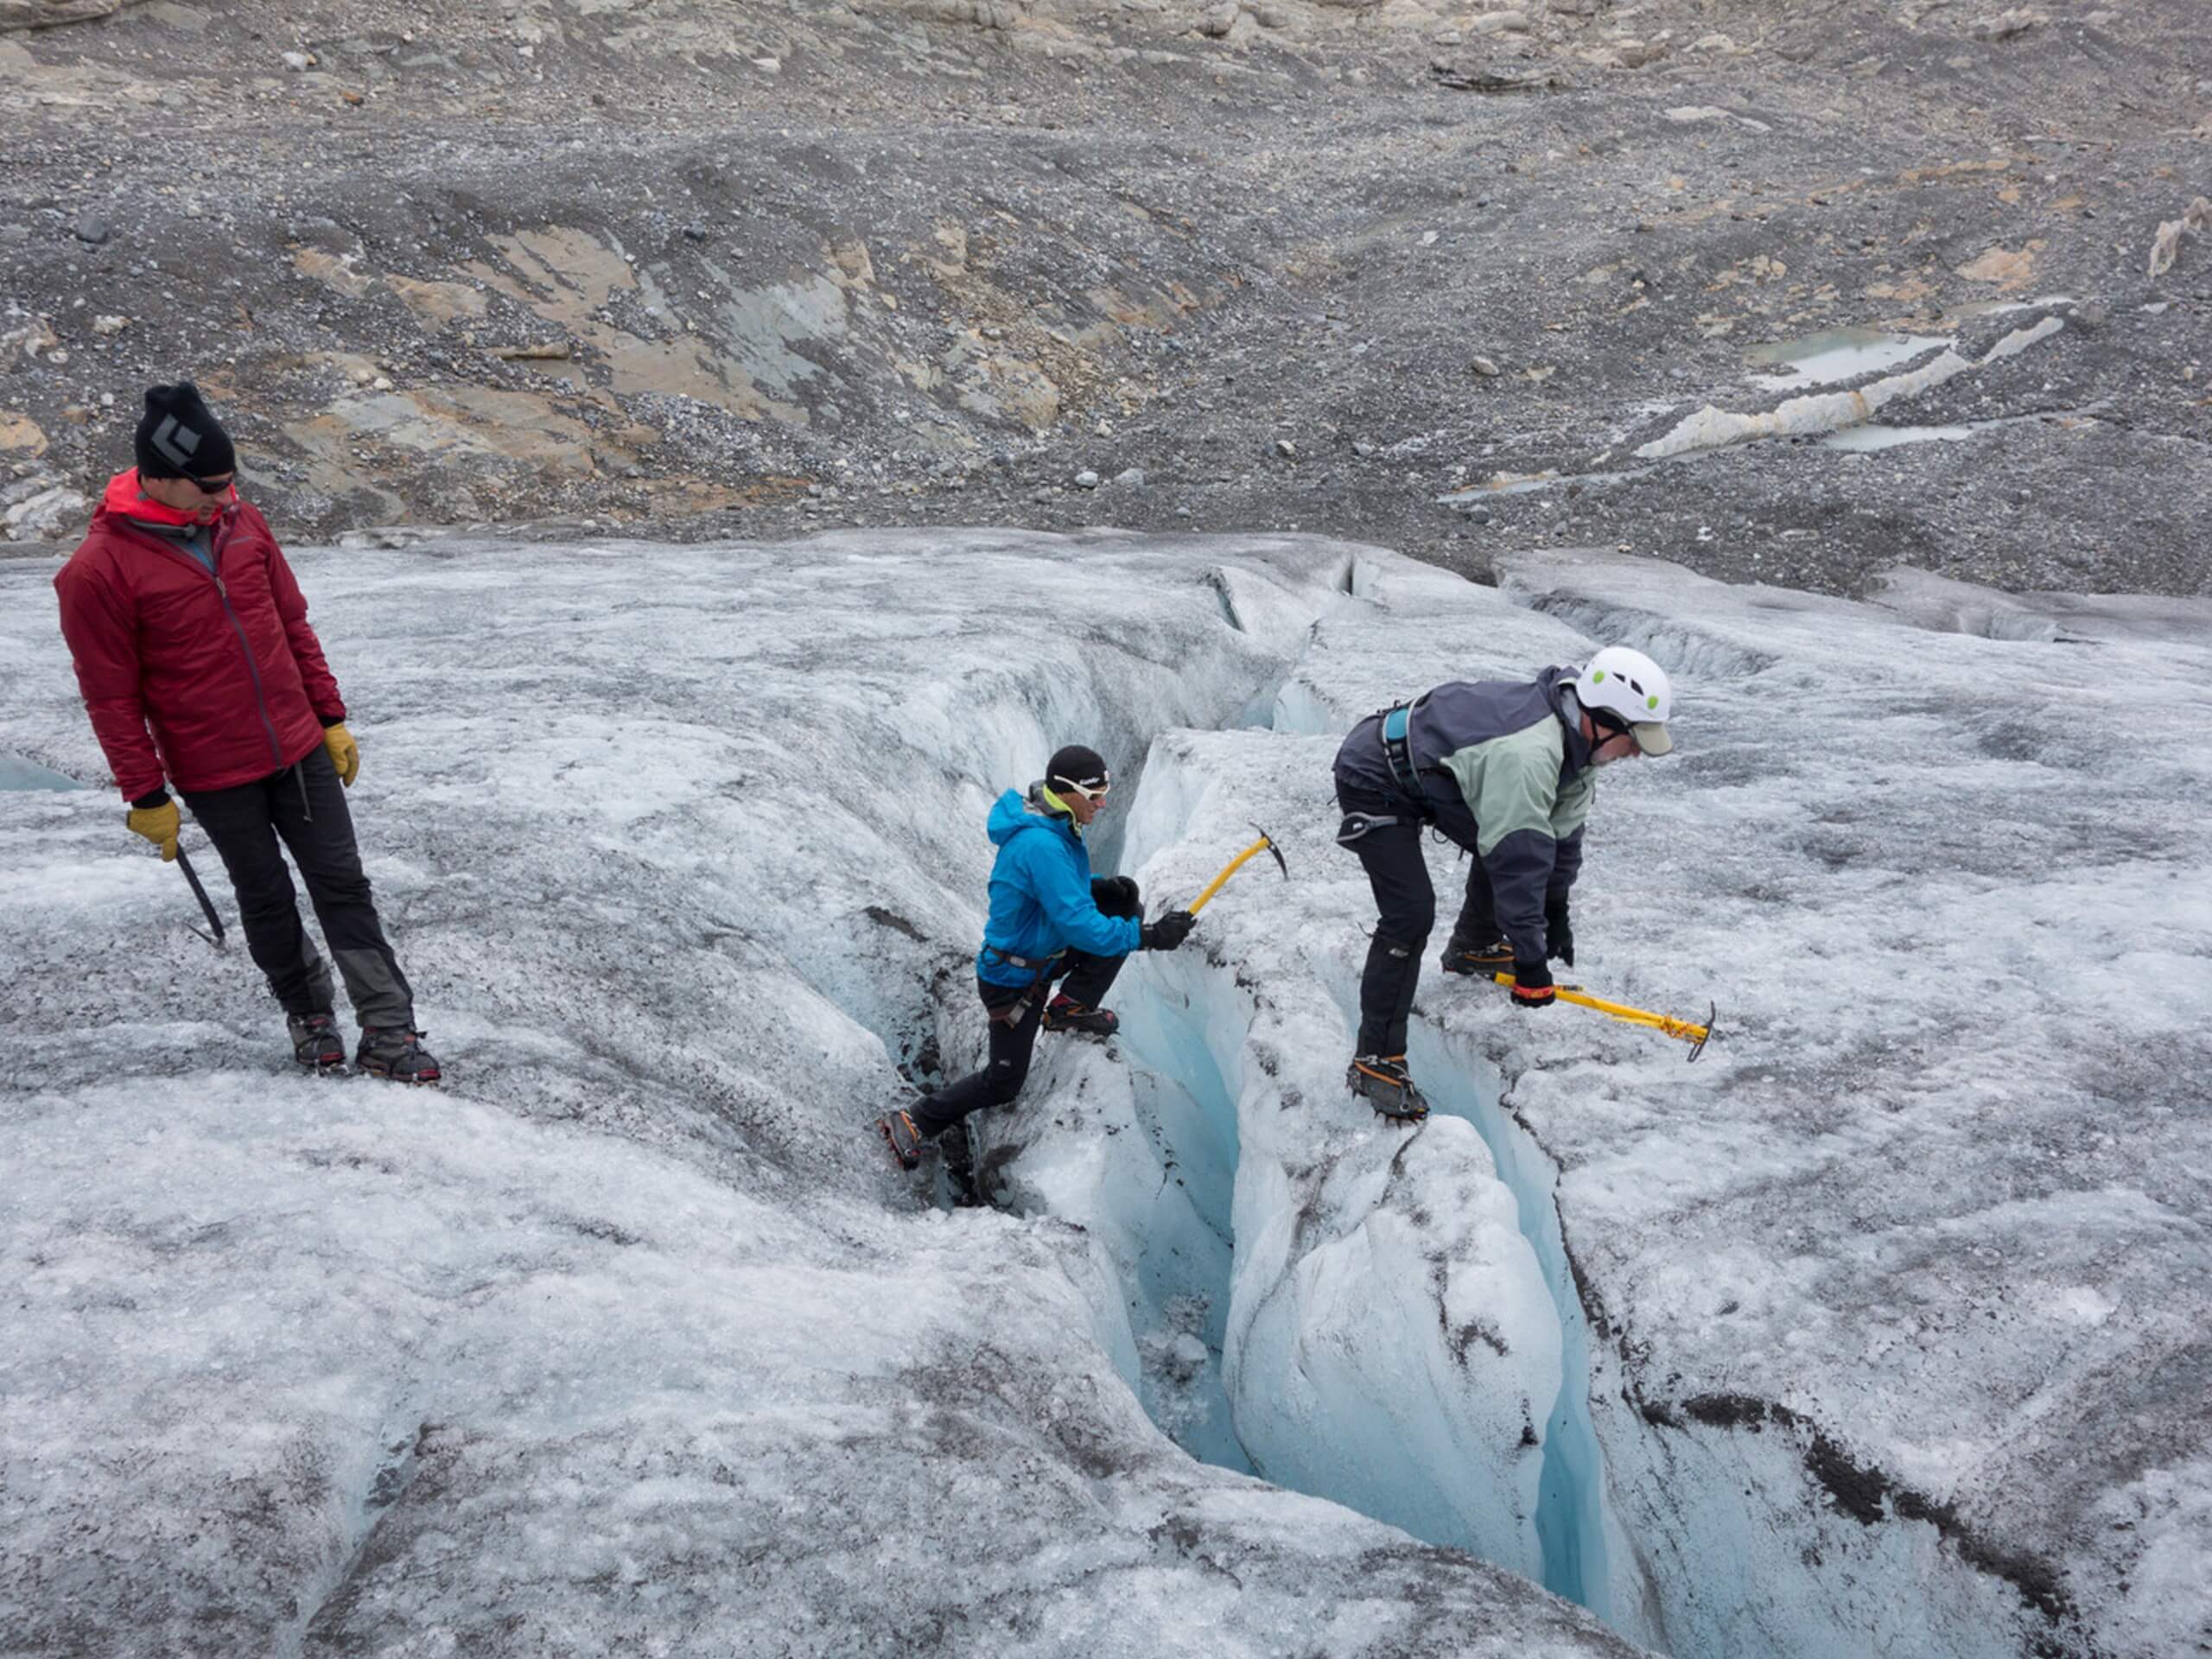 Group of climbers learning to cross the crevasse